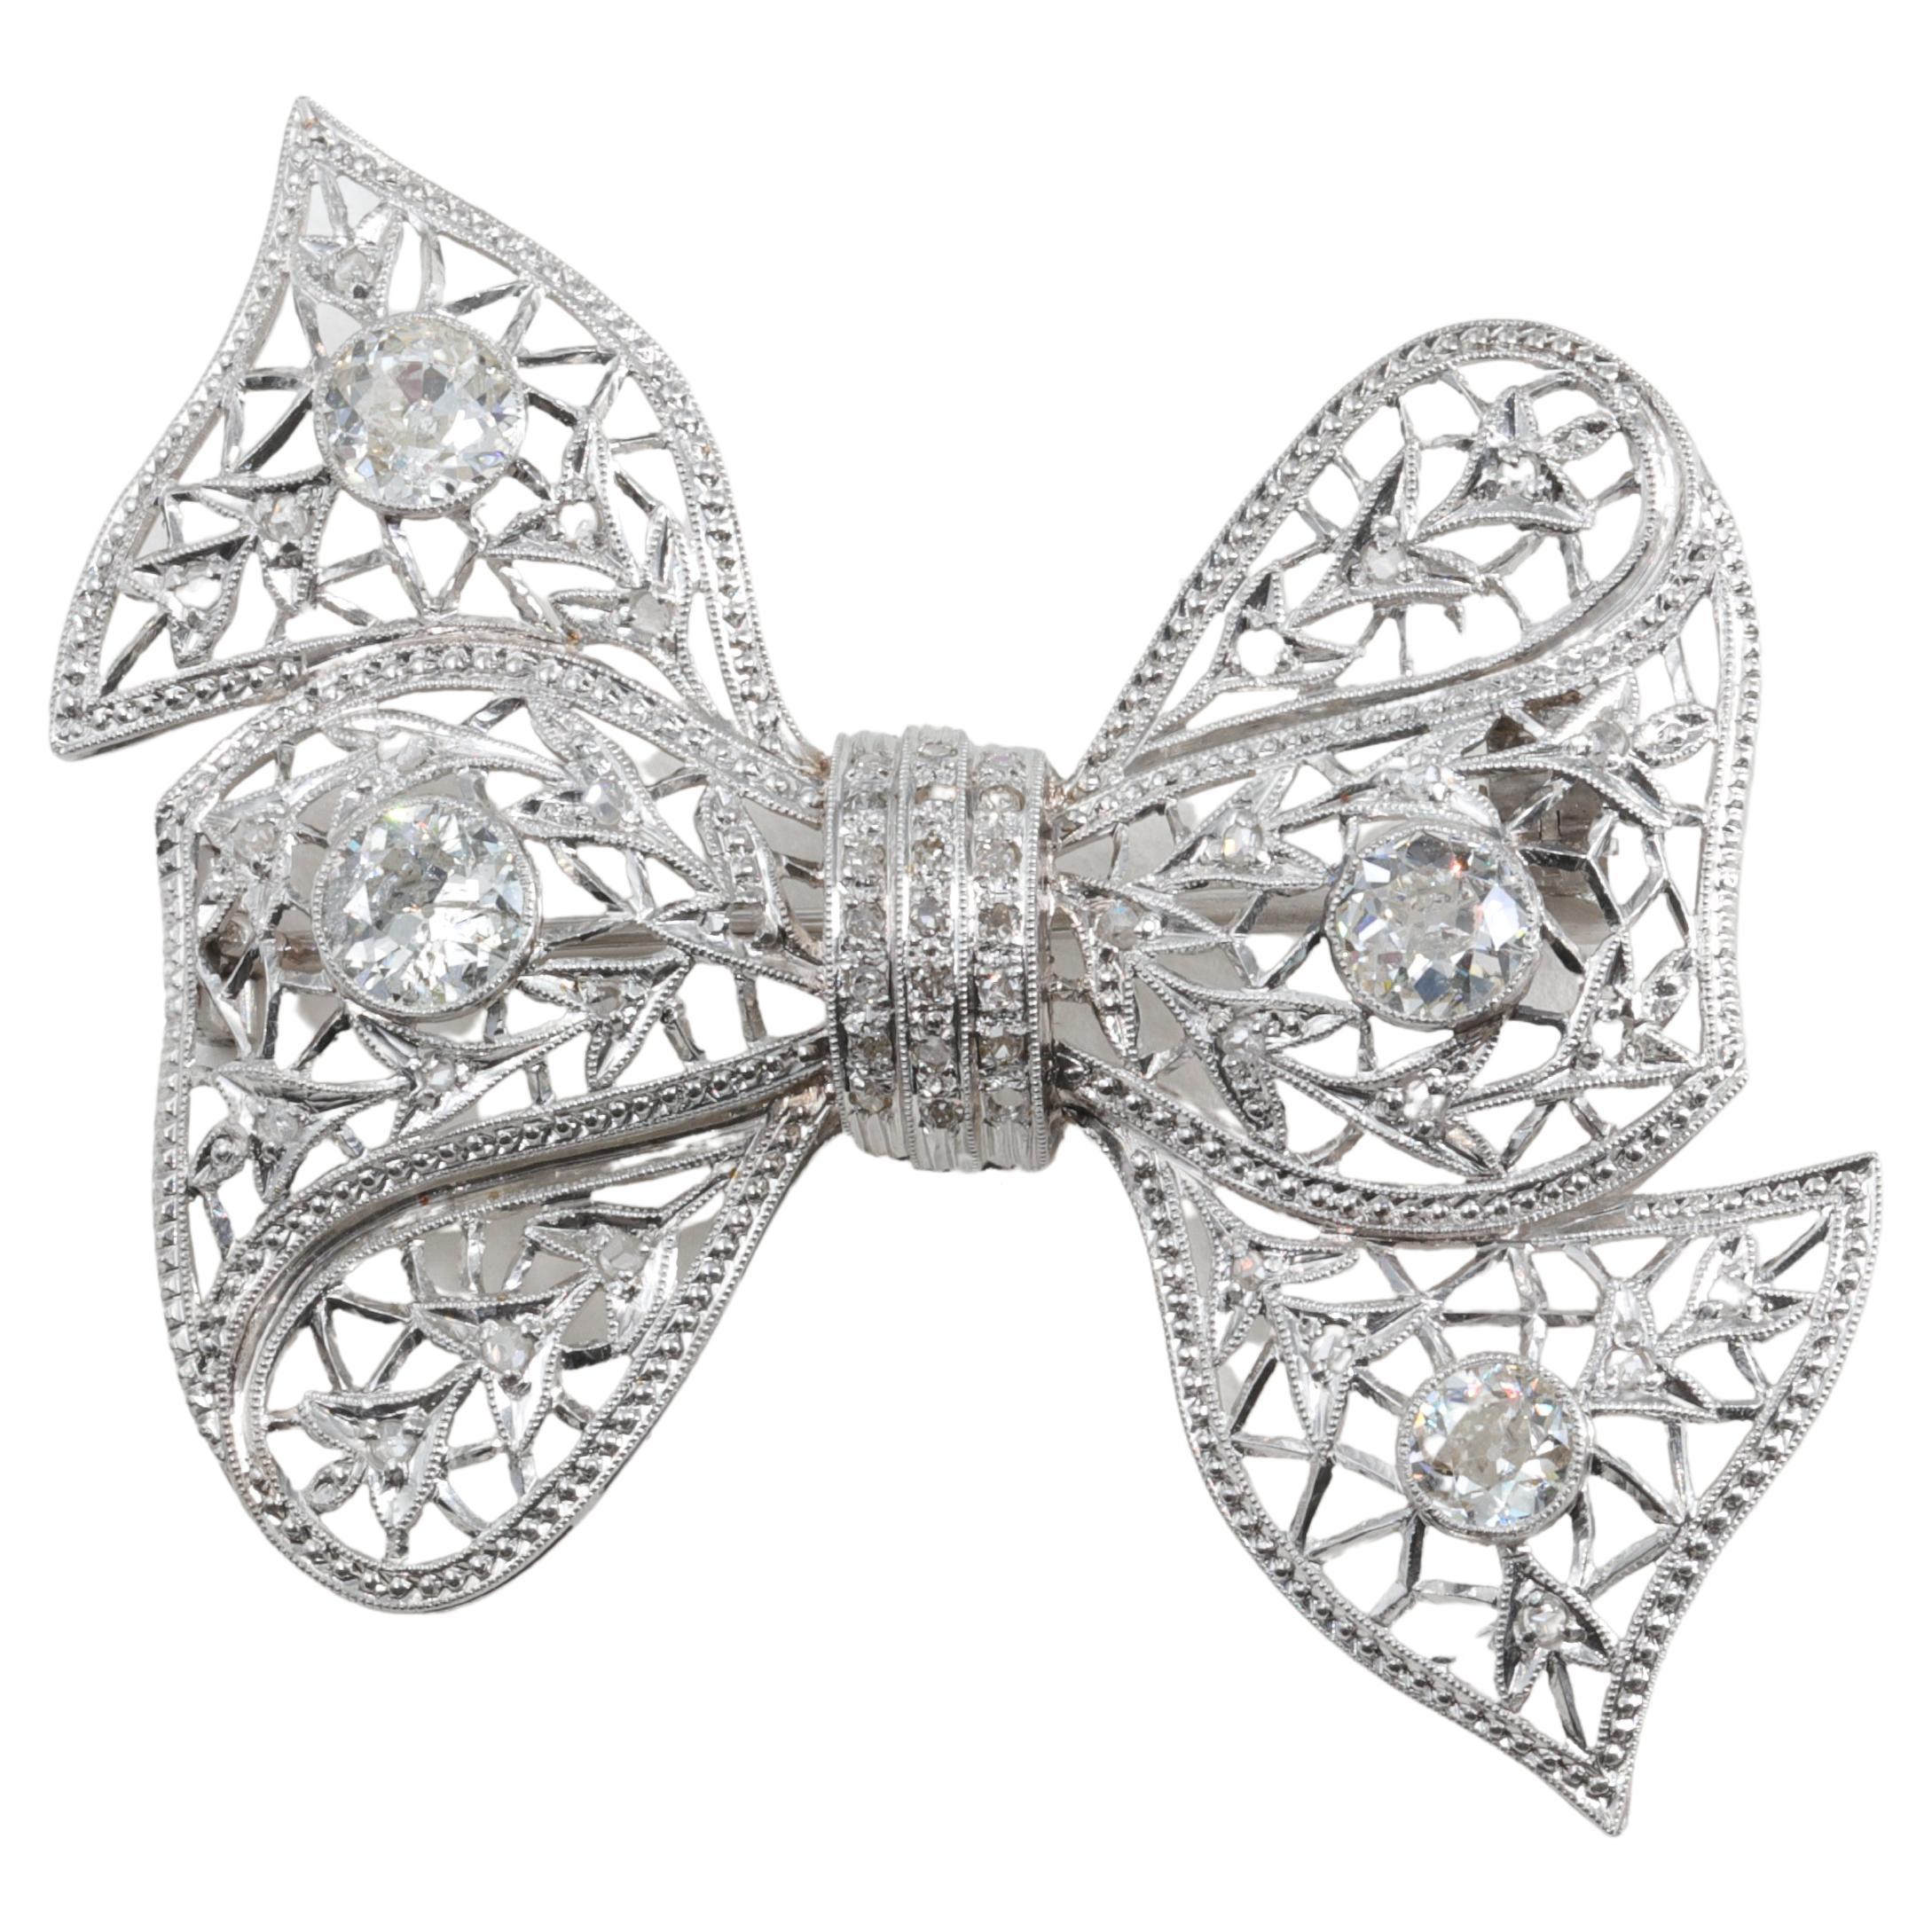 Art Deco Bow Brooch with Old European Cut Diamonds in Platinum